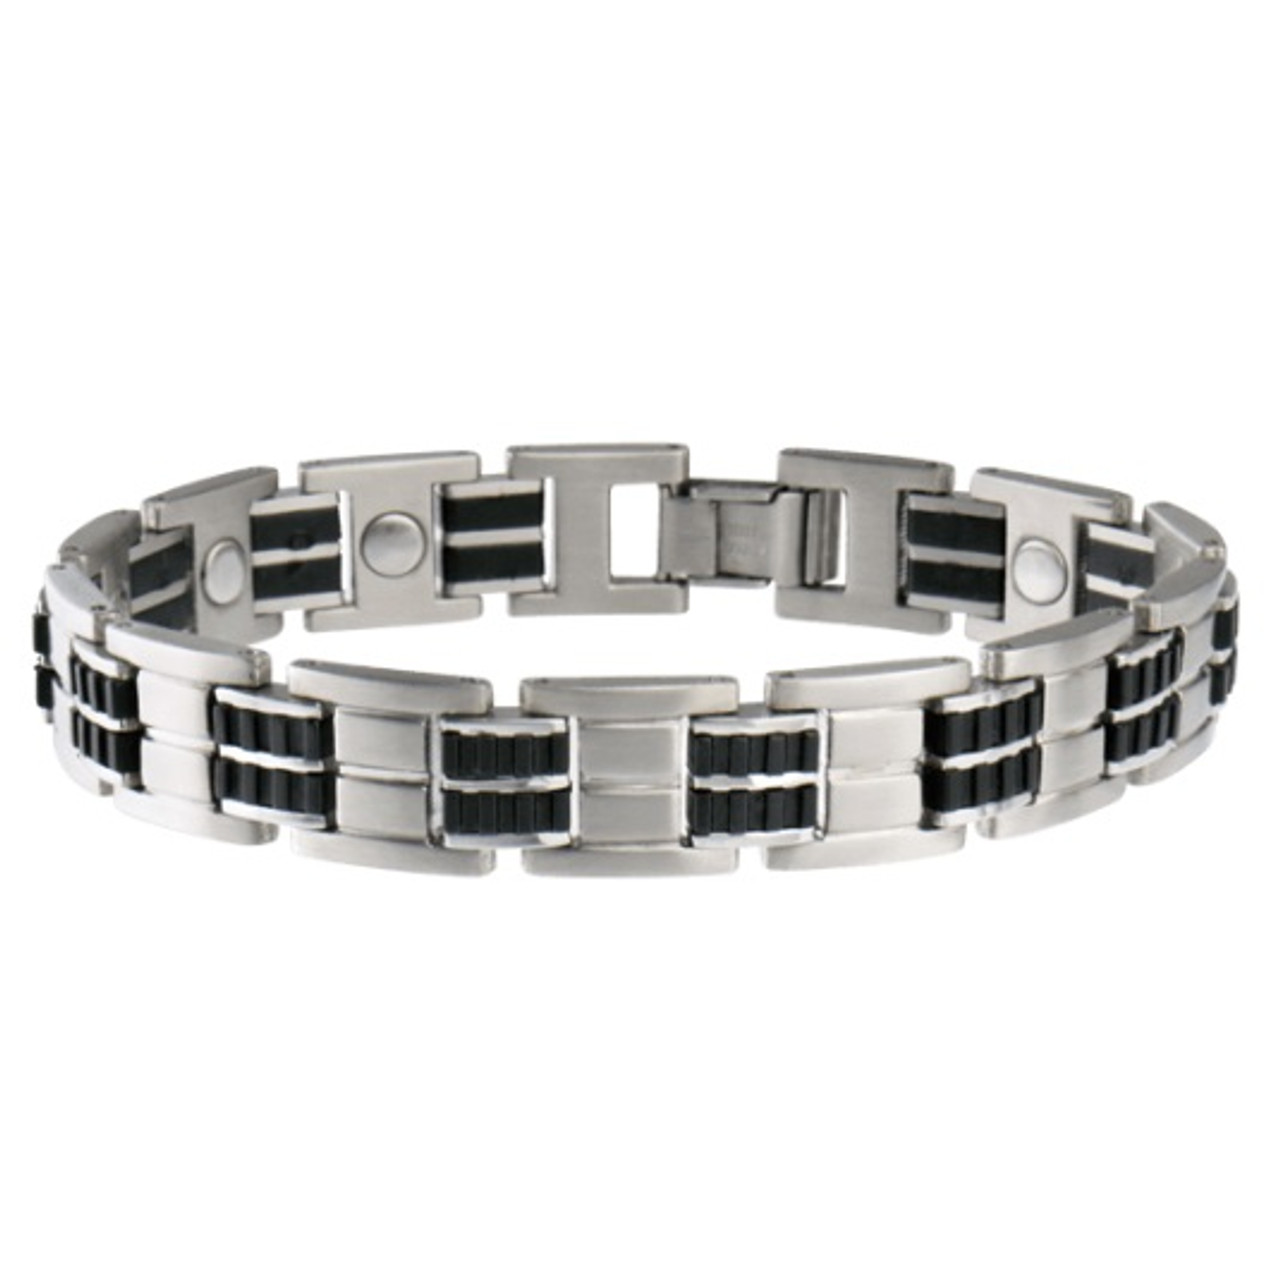 Buy Sabona Two Tone Steel Magnetic Bracelet, Small/Medium Online at Low  Prices in India - Amazon.in